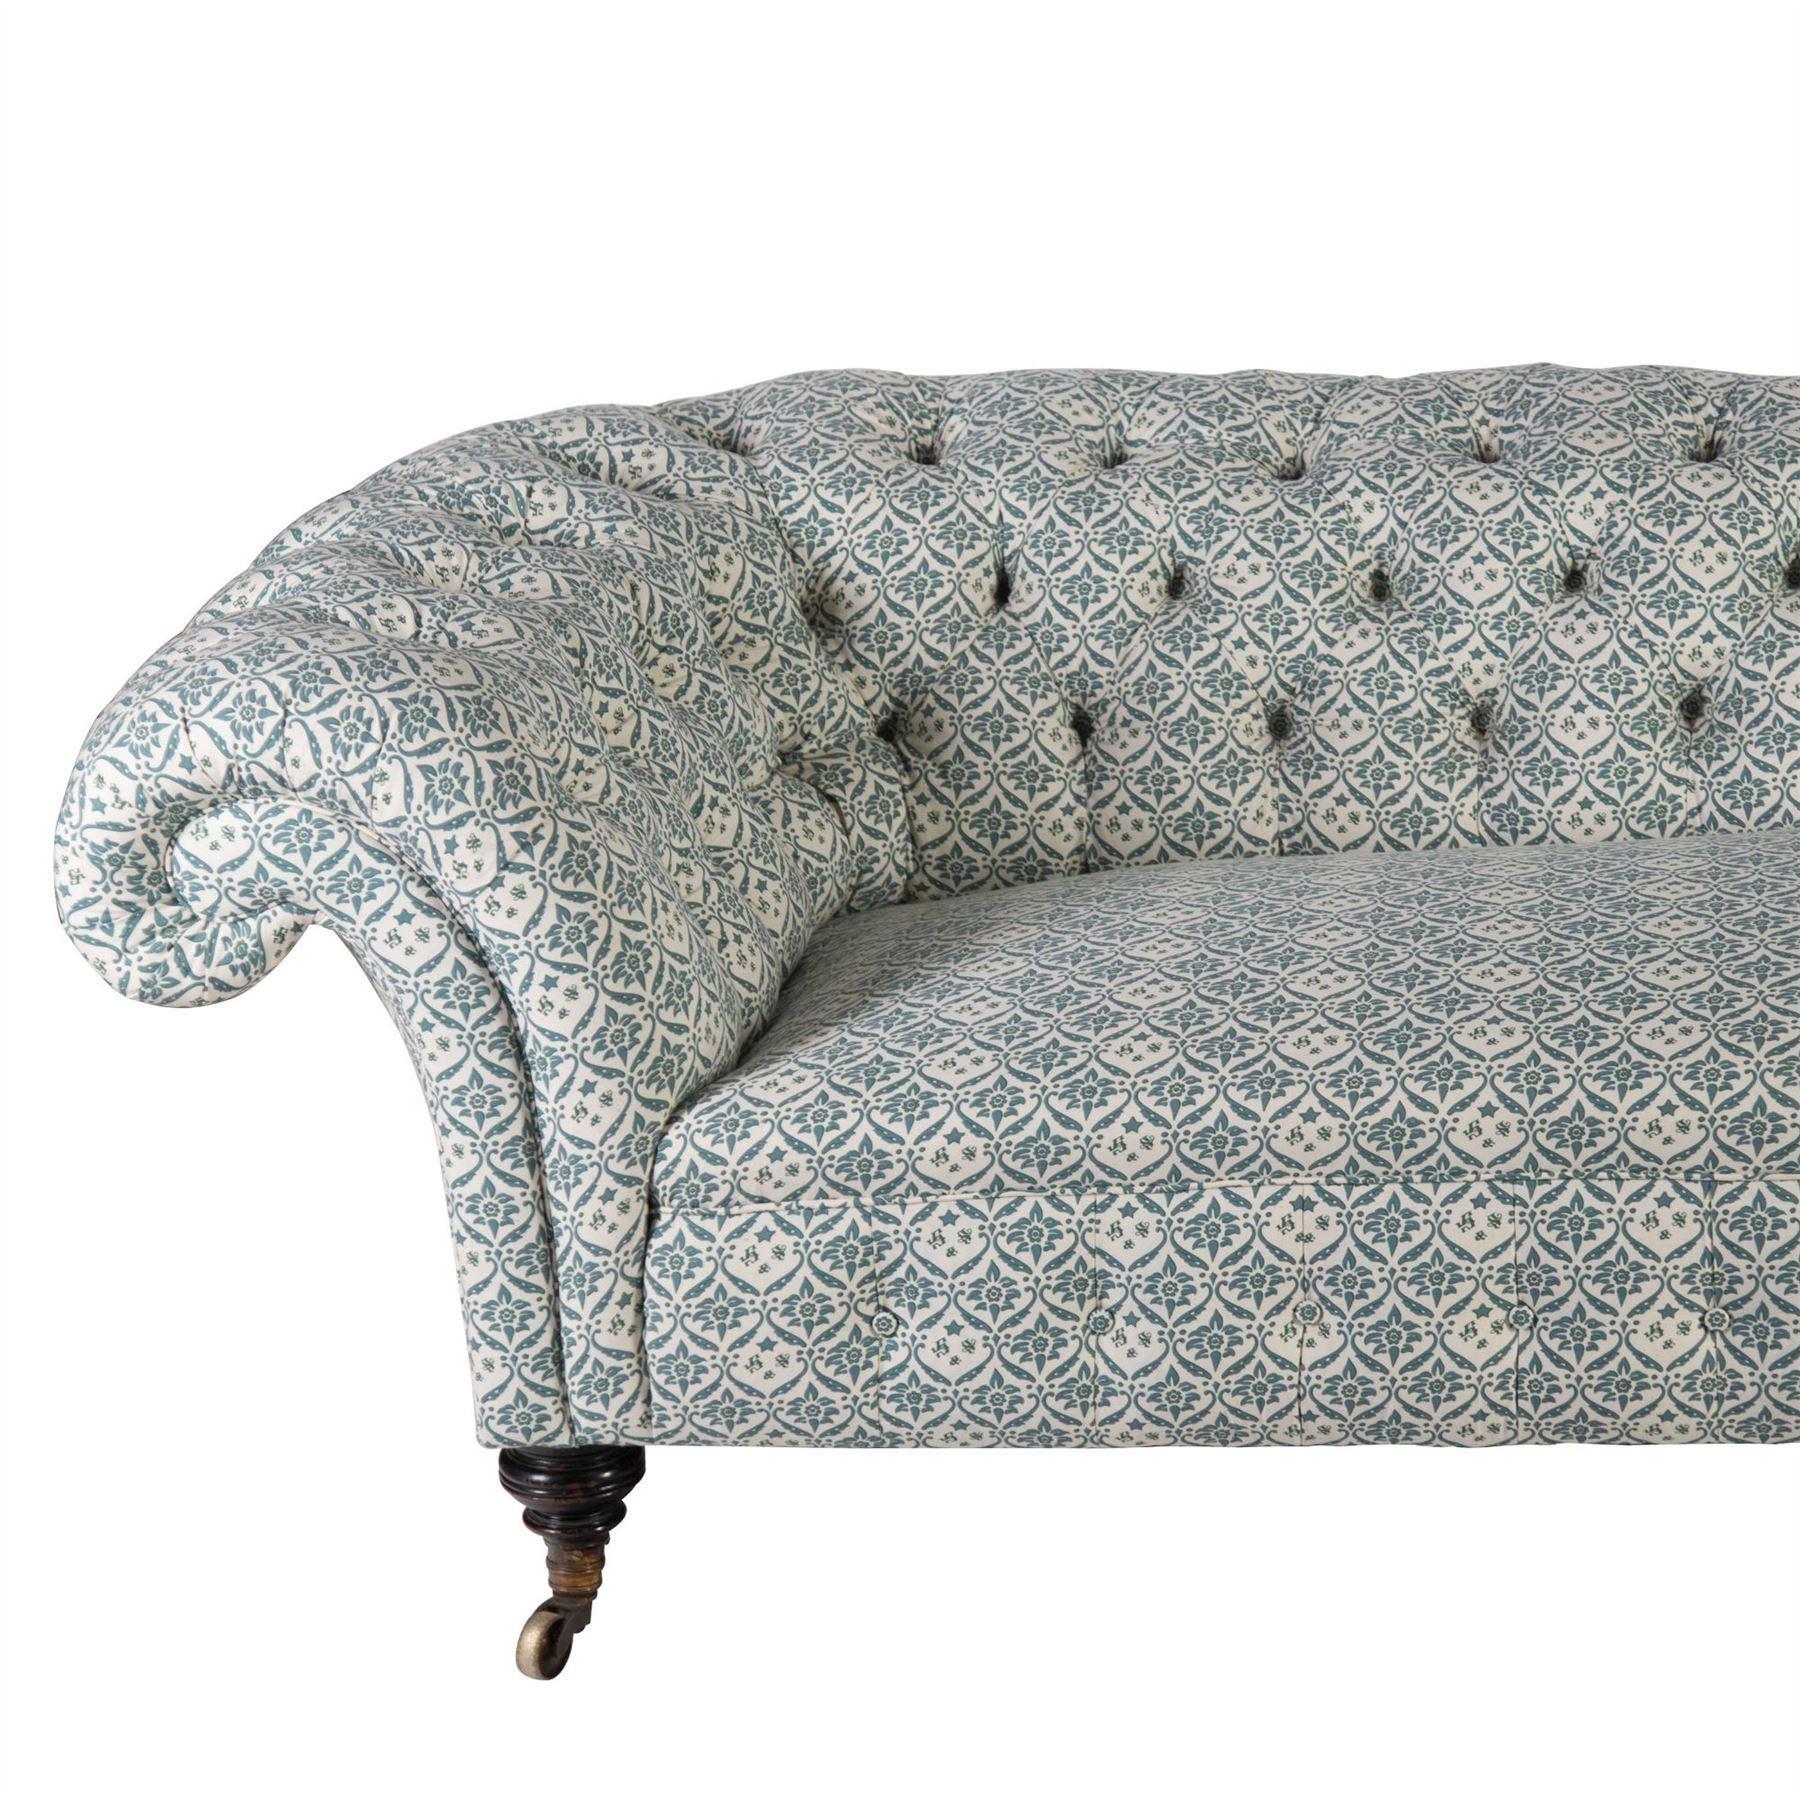 English 19th Century Howard and Sons Chesterfield Sofa